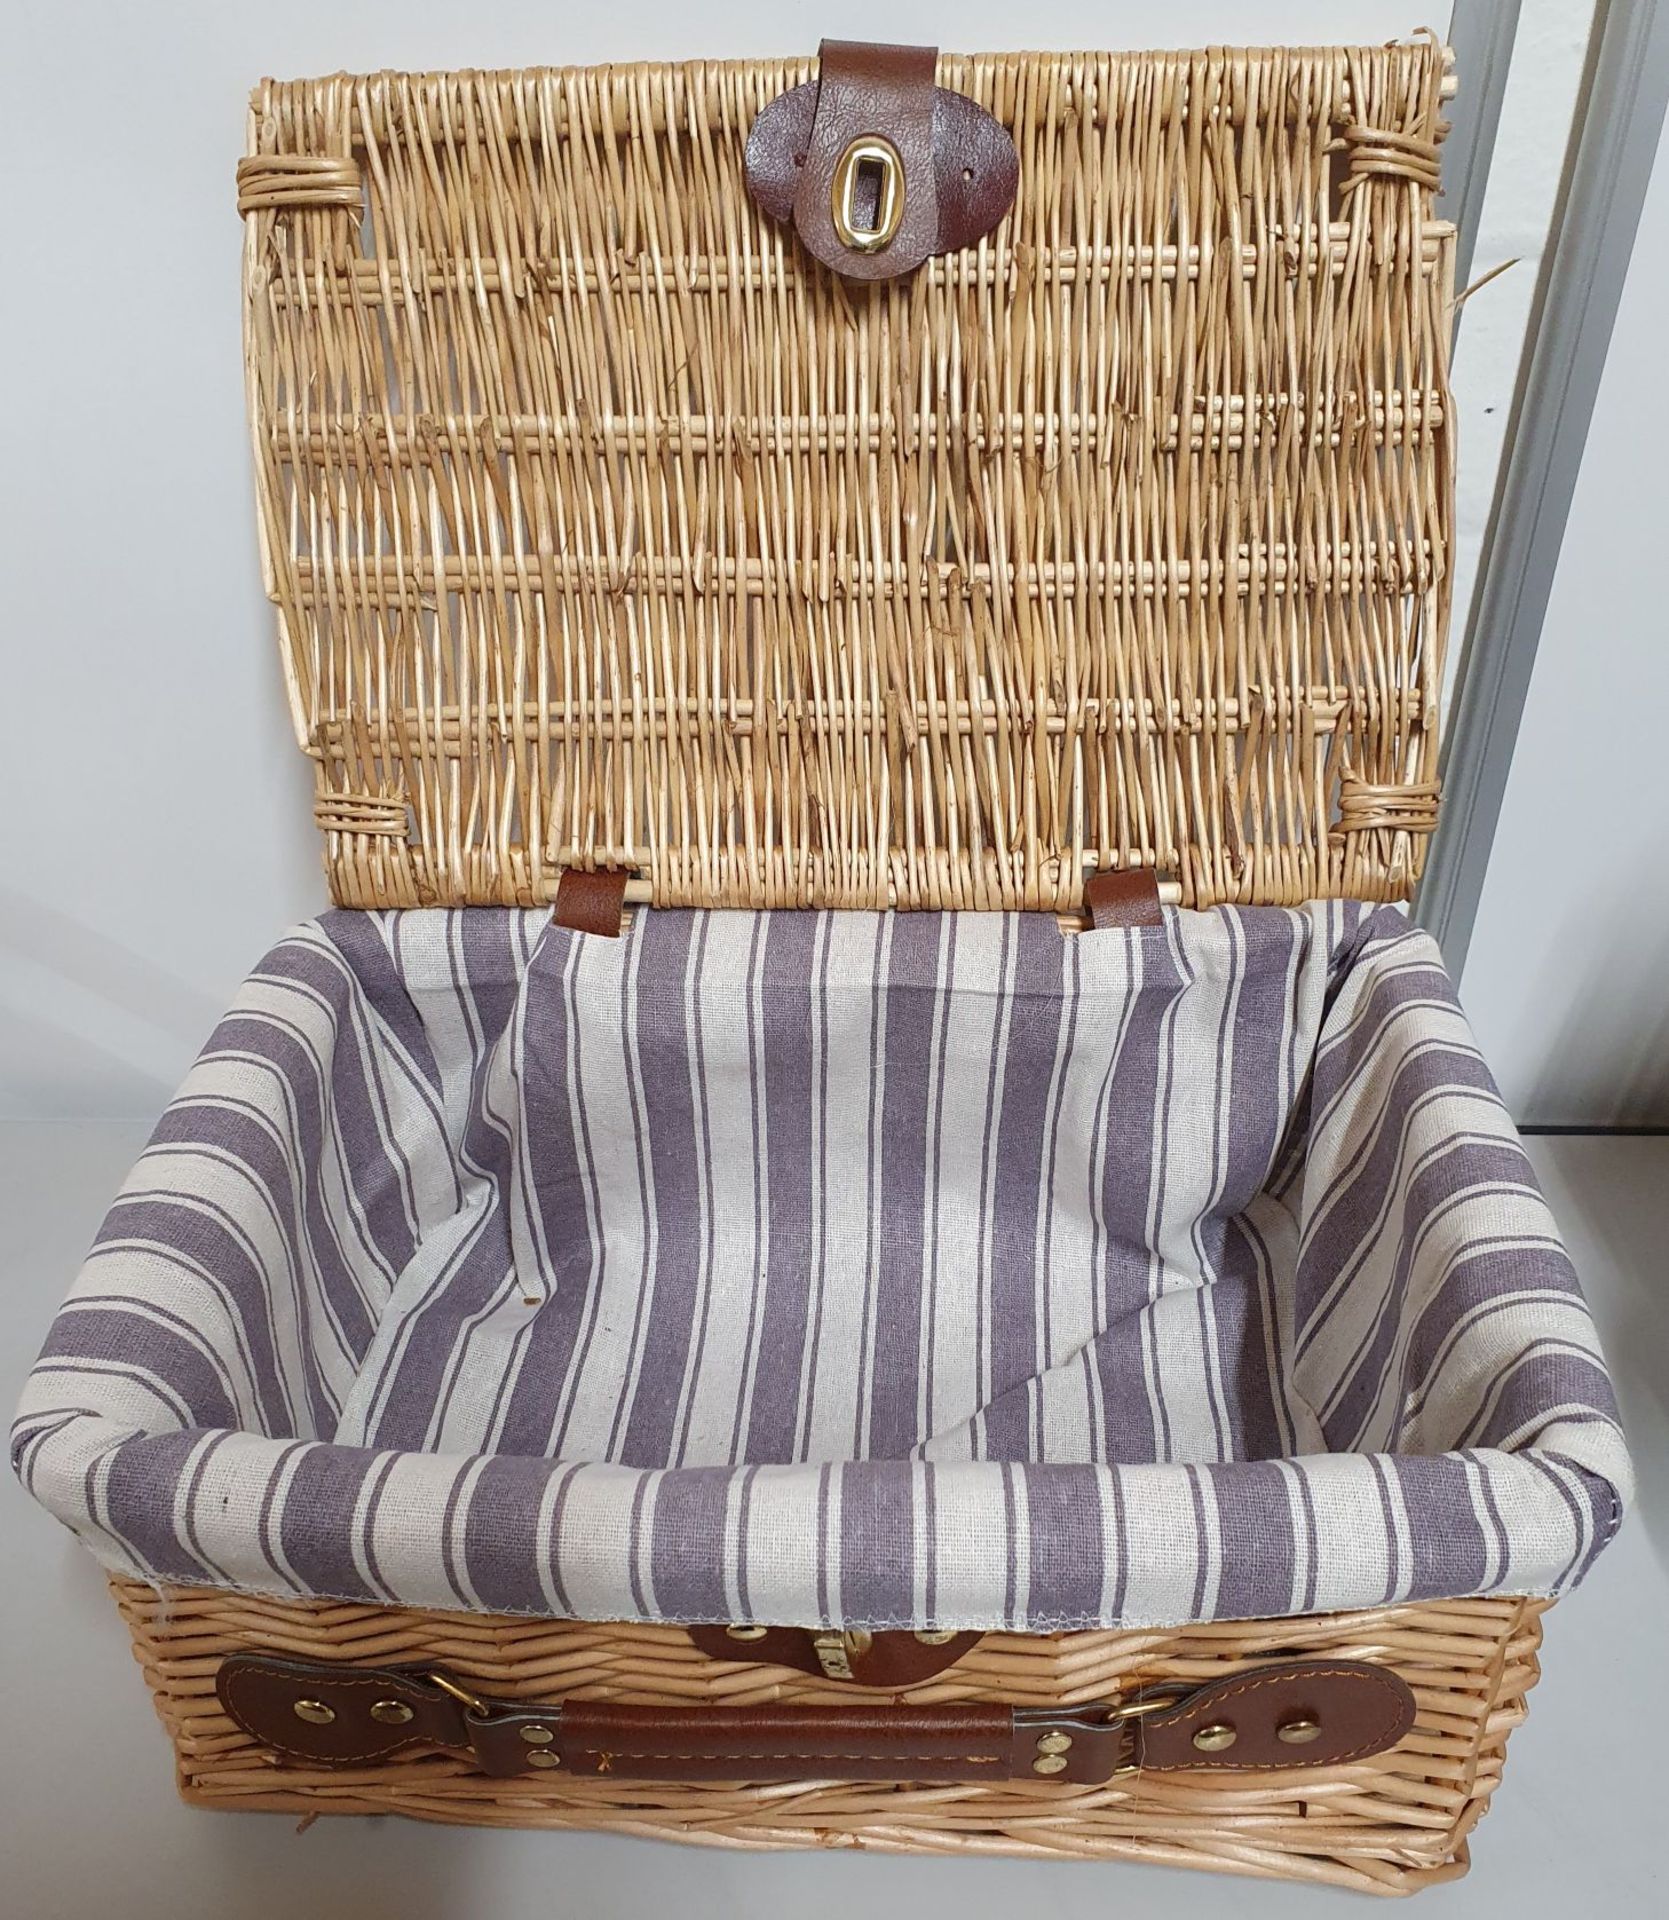 1 X WICKER BASKET SIZE: W-37CM H-17CM D-25CM *BLUE COLOURED LINING* RRP £10 - AS NEW - Image 2 of 2